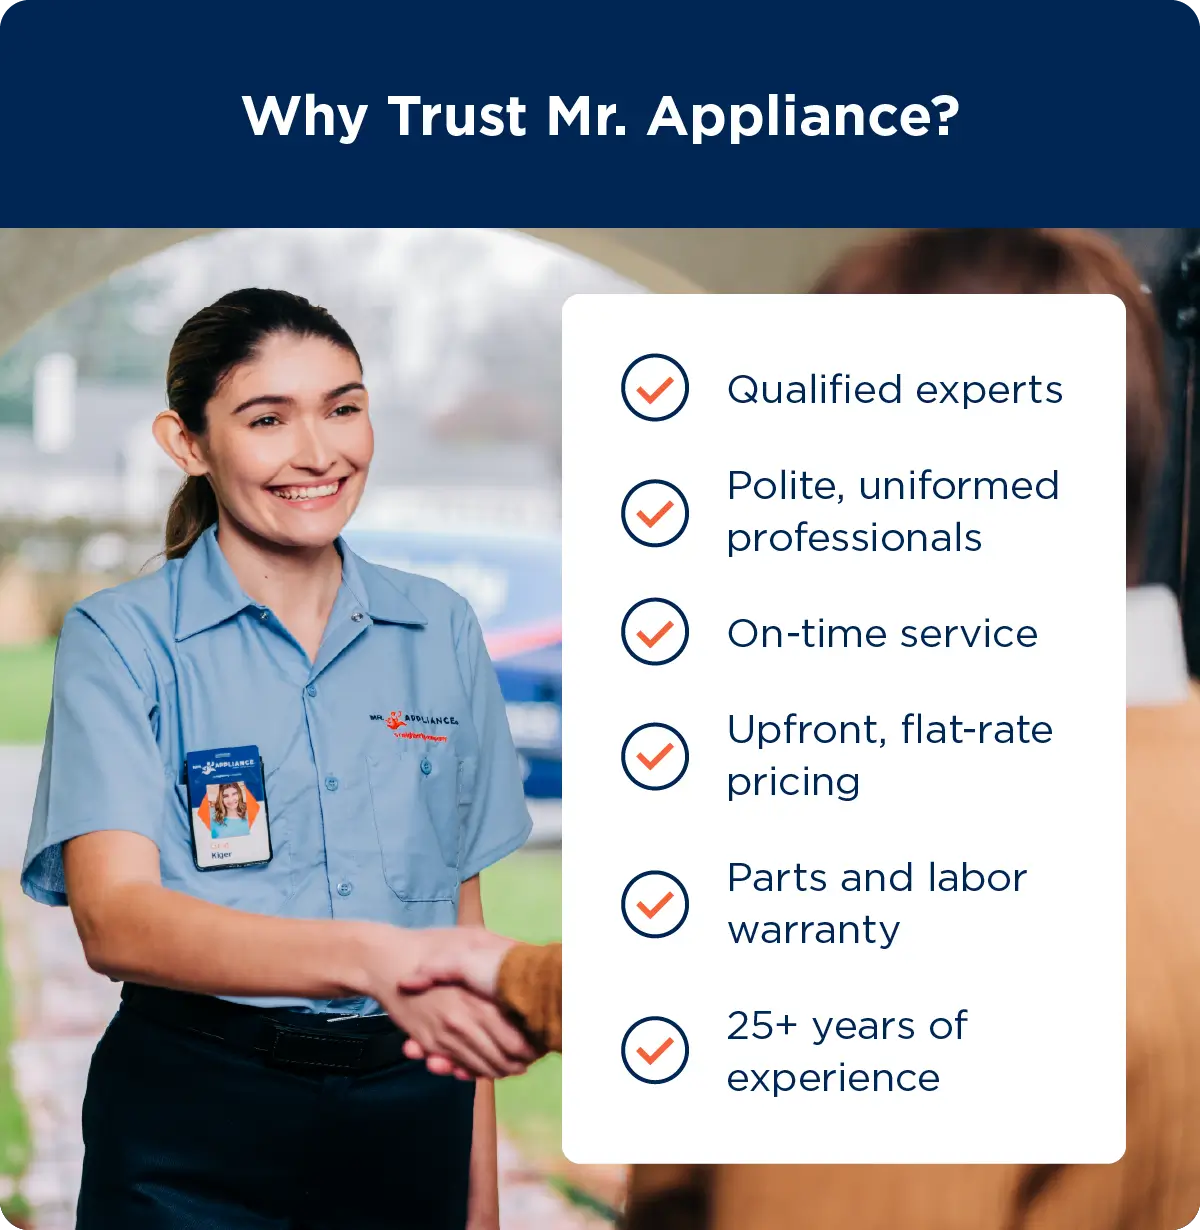 List of reasons why you should hire Mr. Appliance for your electric dryer repairs, including qualified experts, polite professionals, on-time service, up-front pricing, parts and labor warranty, and 25+ years of experience.